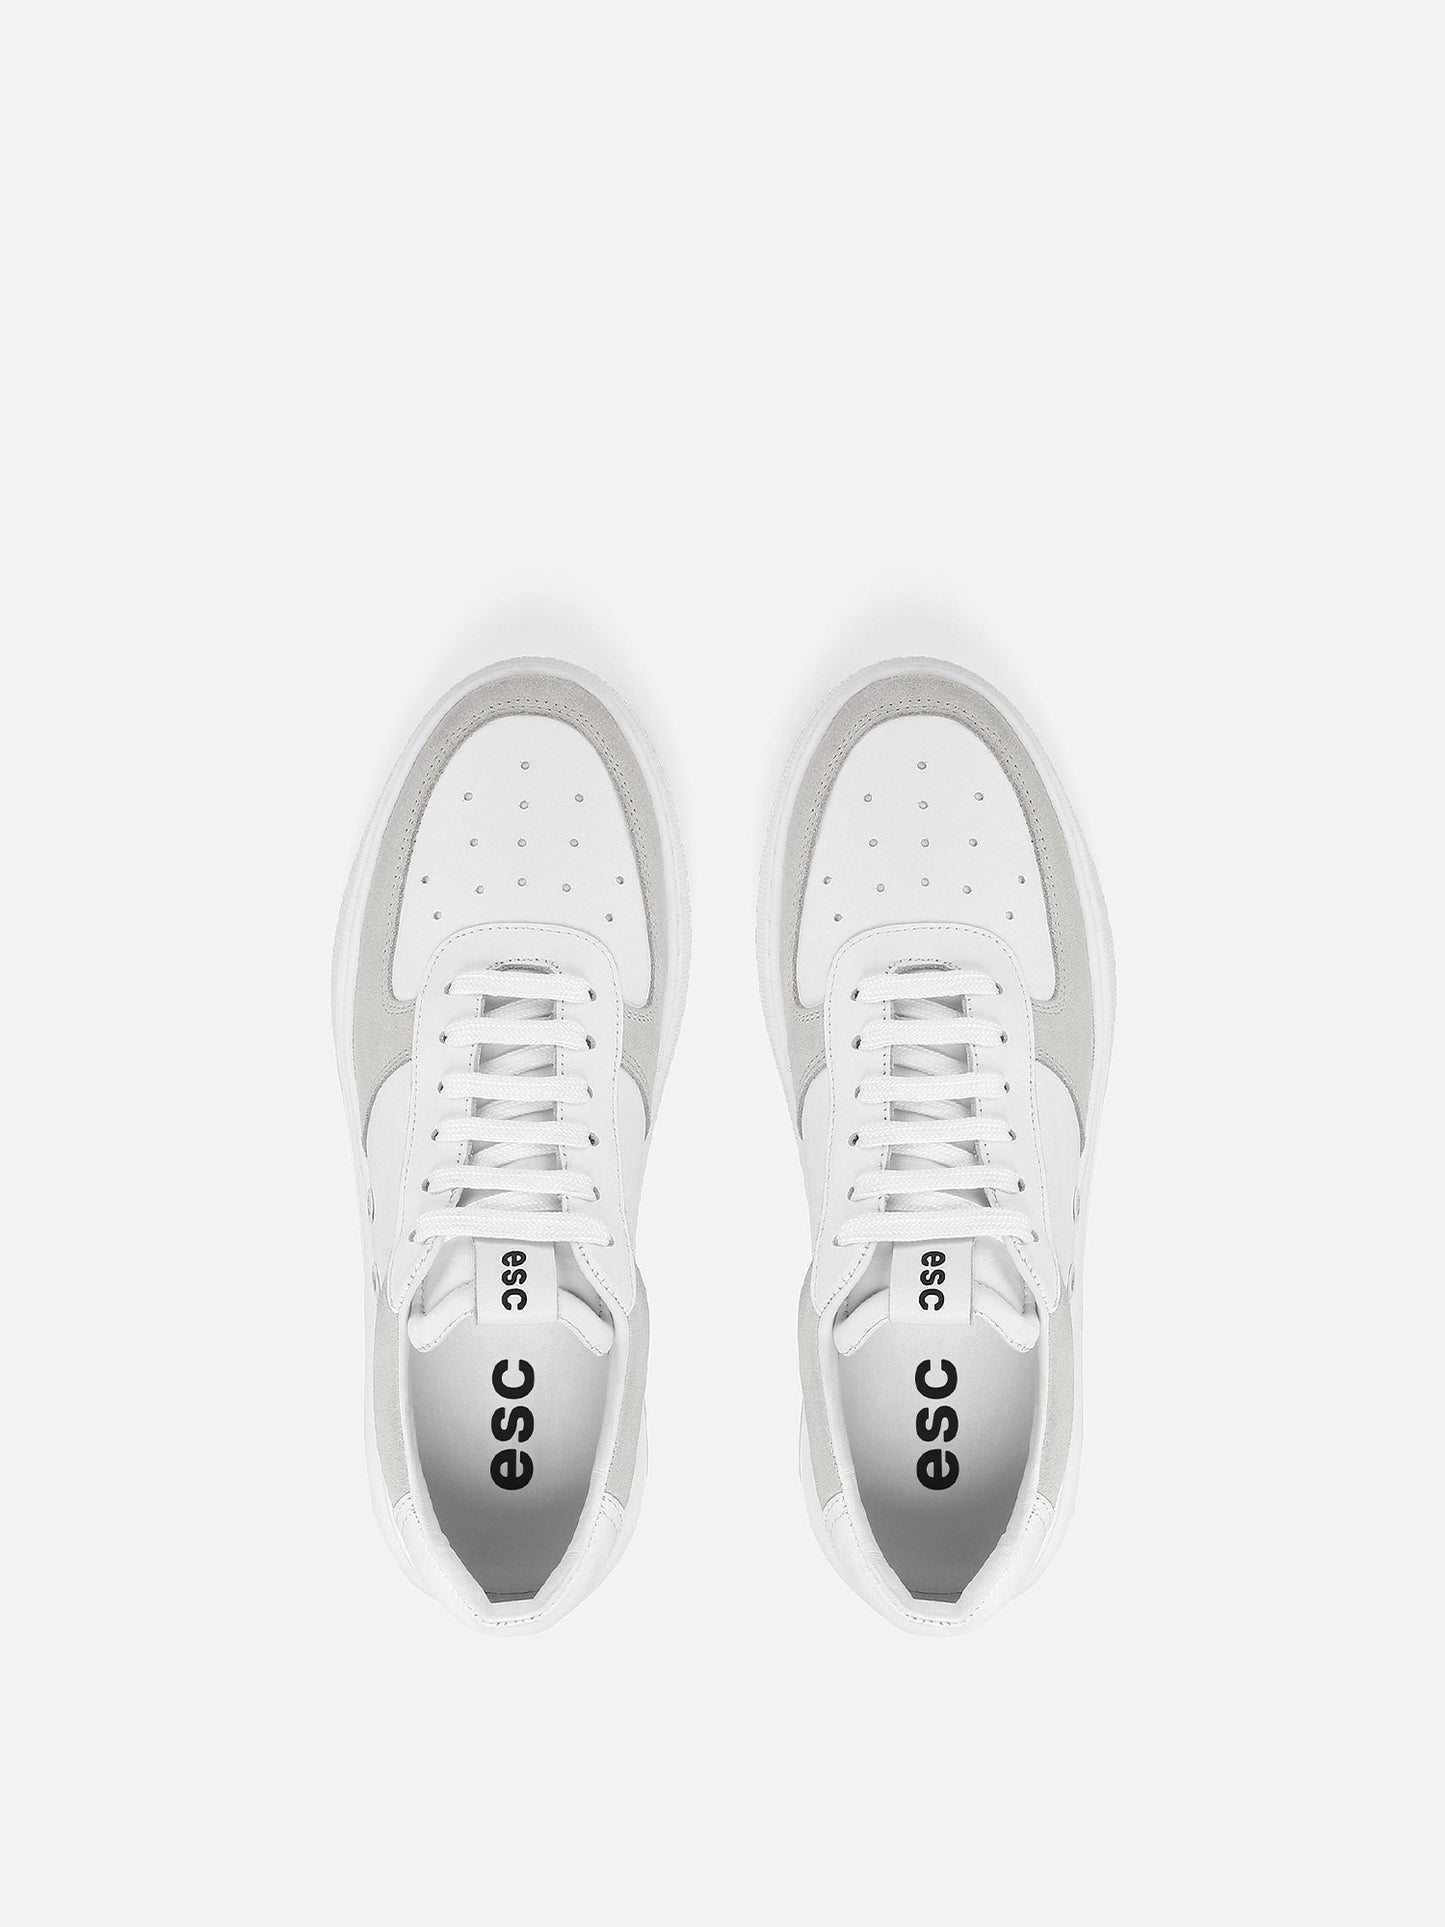 MULLEN Leather Sneakers - White